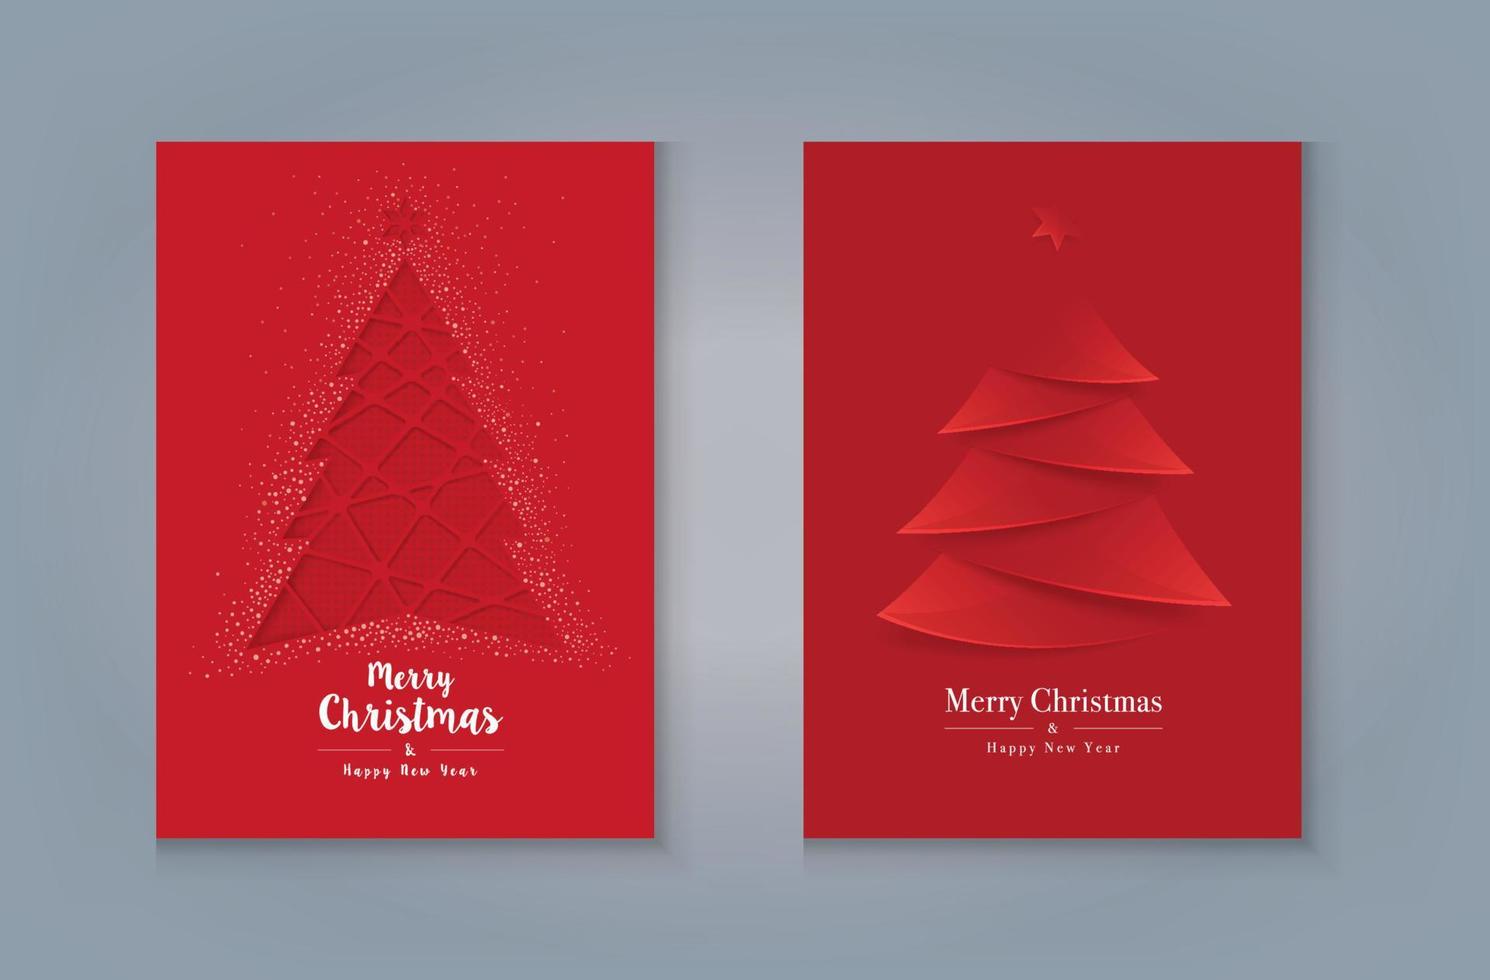 Red Christmas Tree and Snow, Merry Christmas Greeting card Design. vector